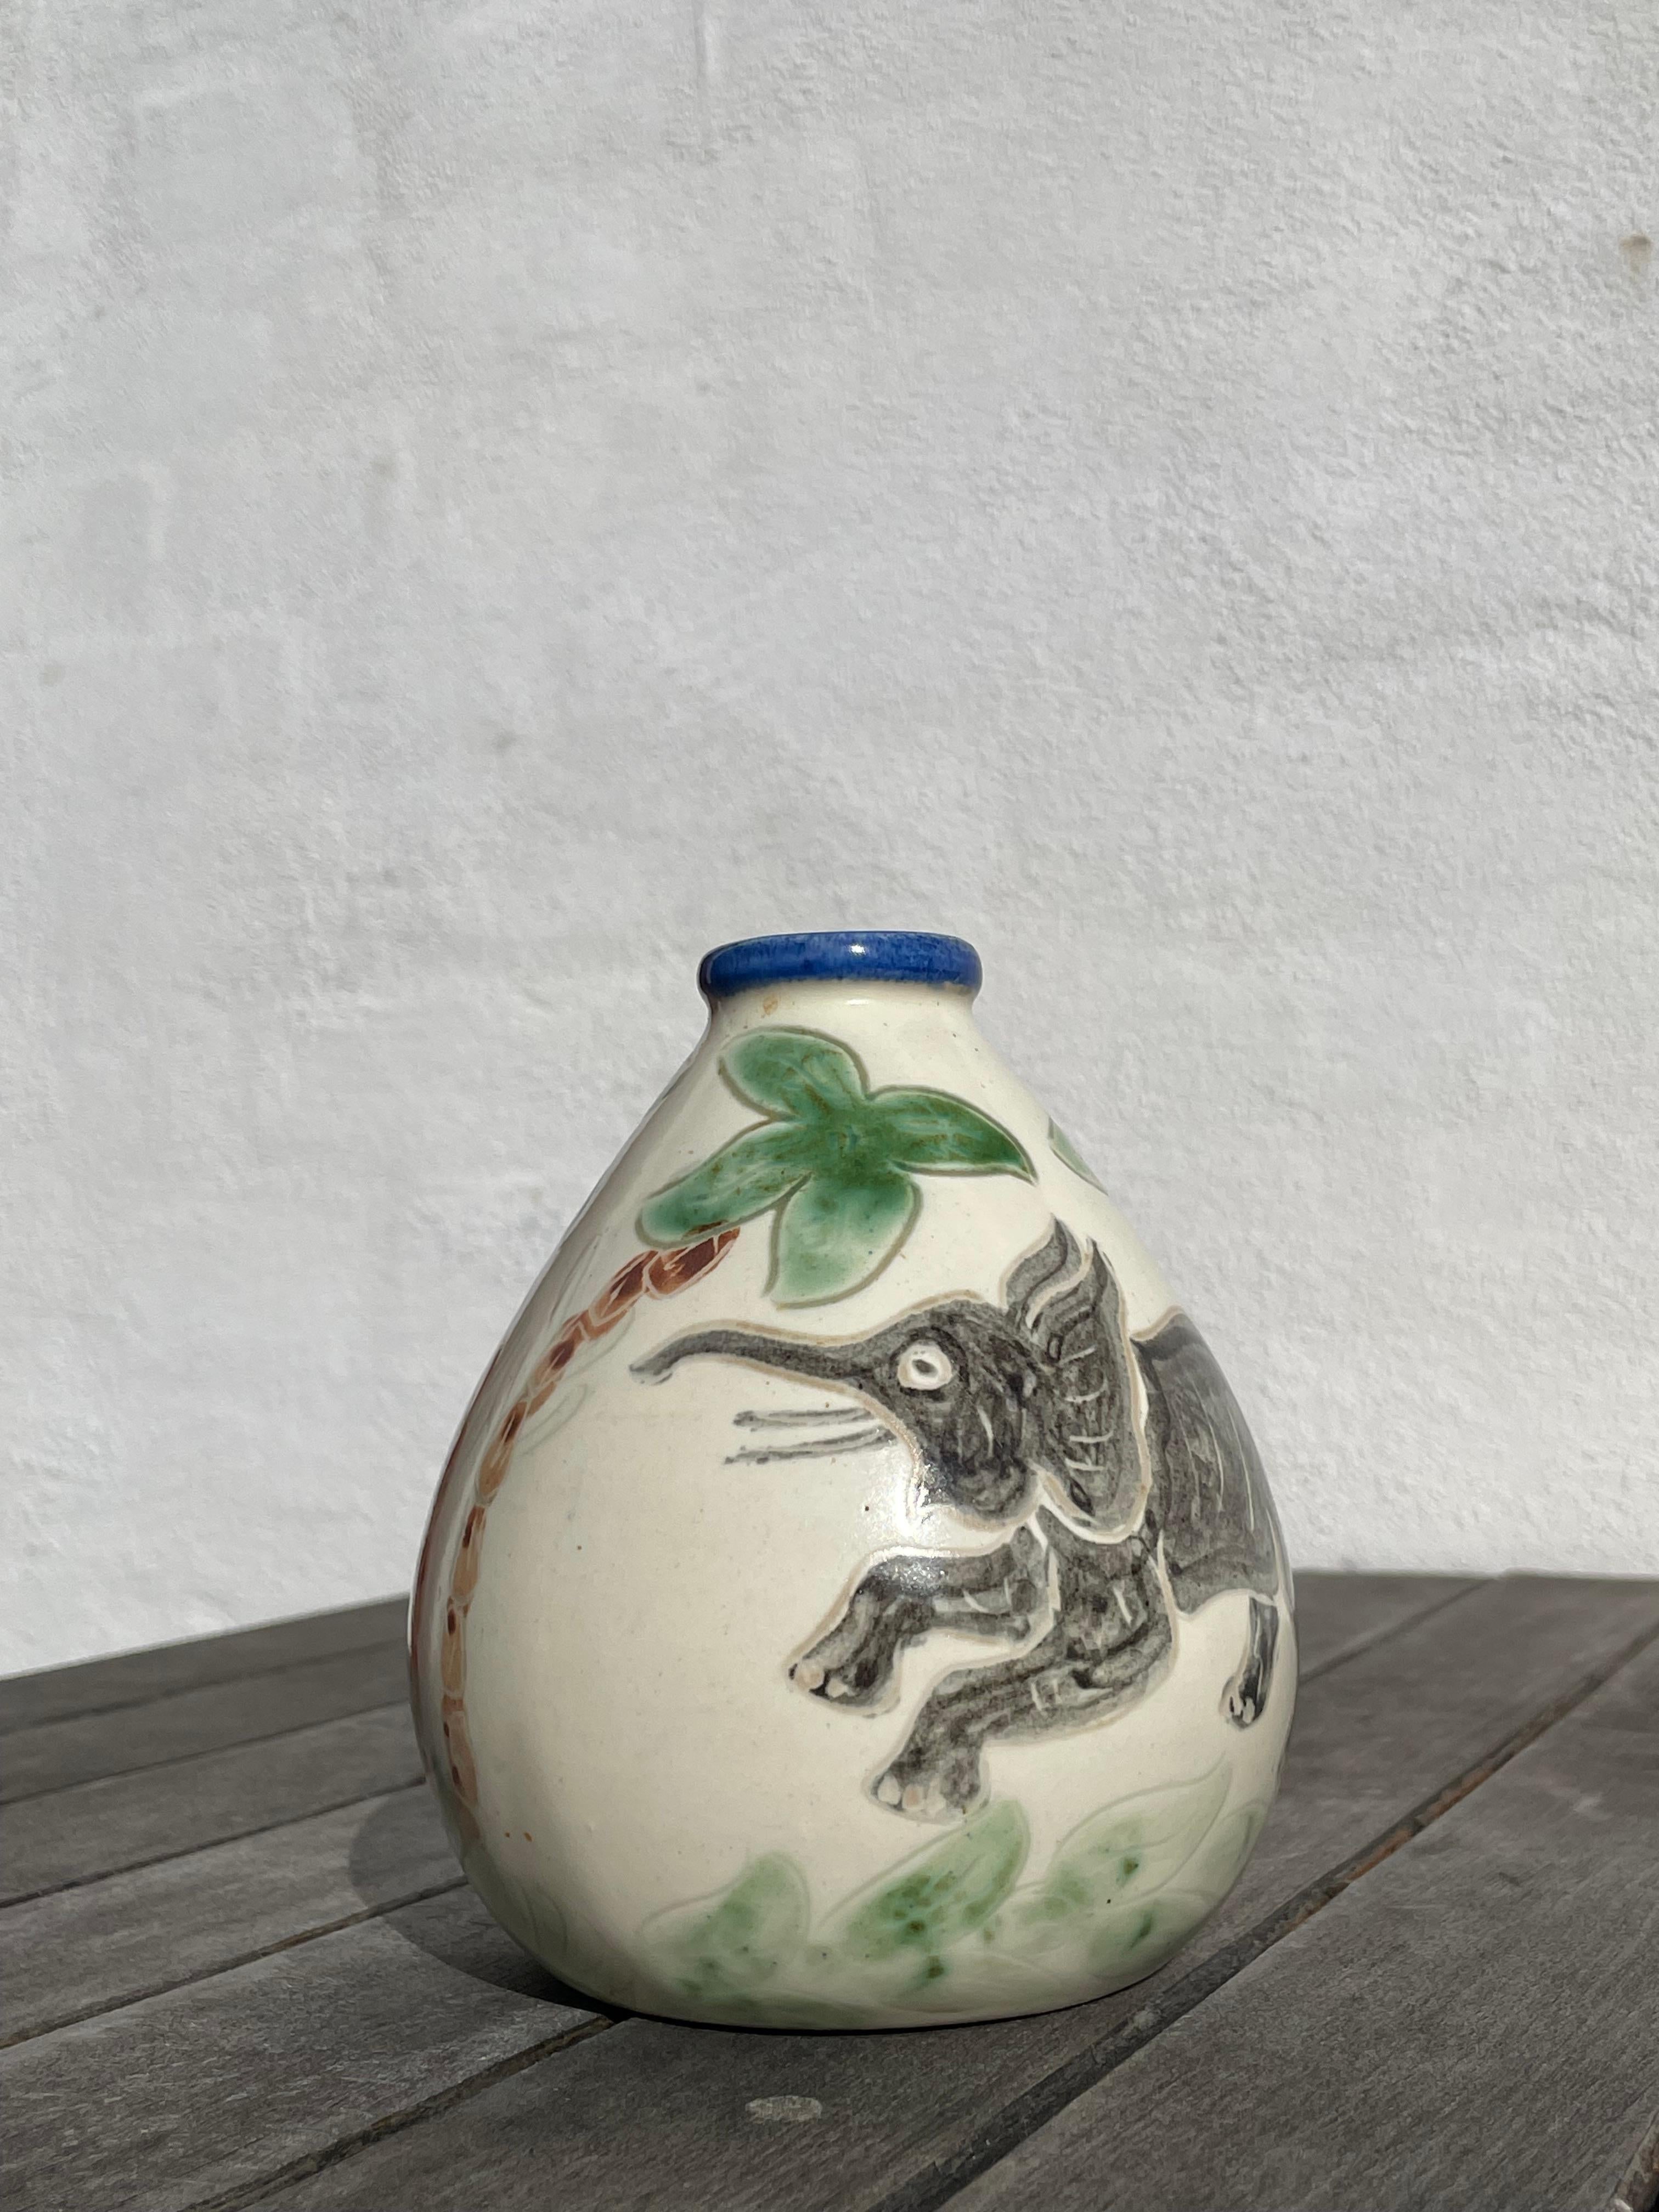 Grimstrup Hand-Decorated Vase with Elephants, Palmtrees, Leaves, 1950s For Sale 4